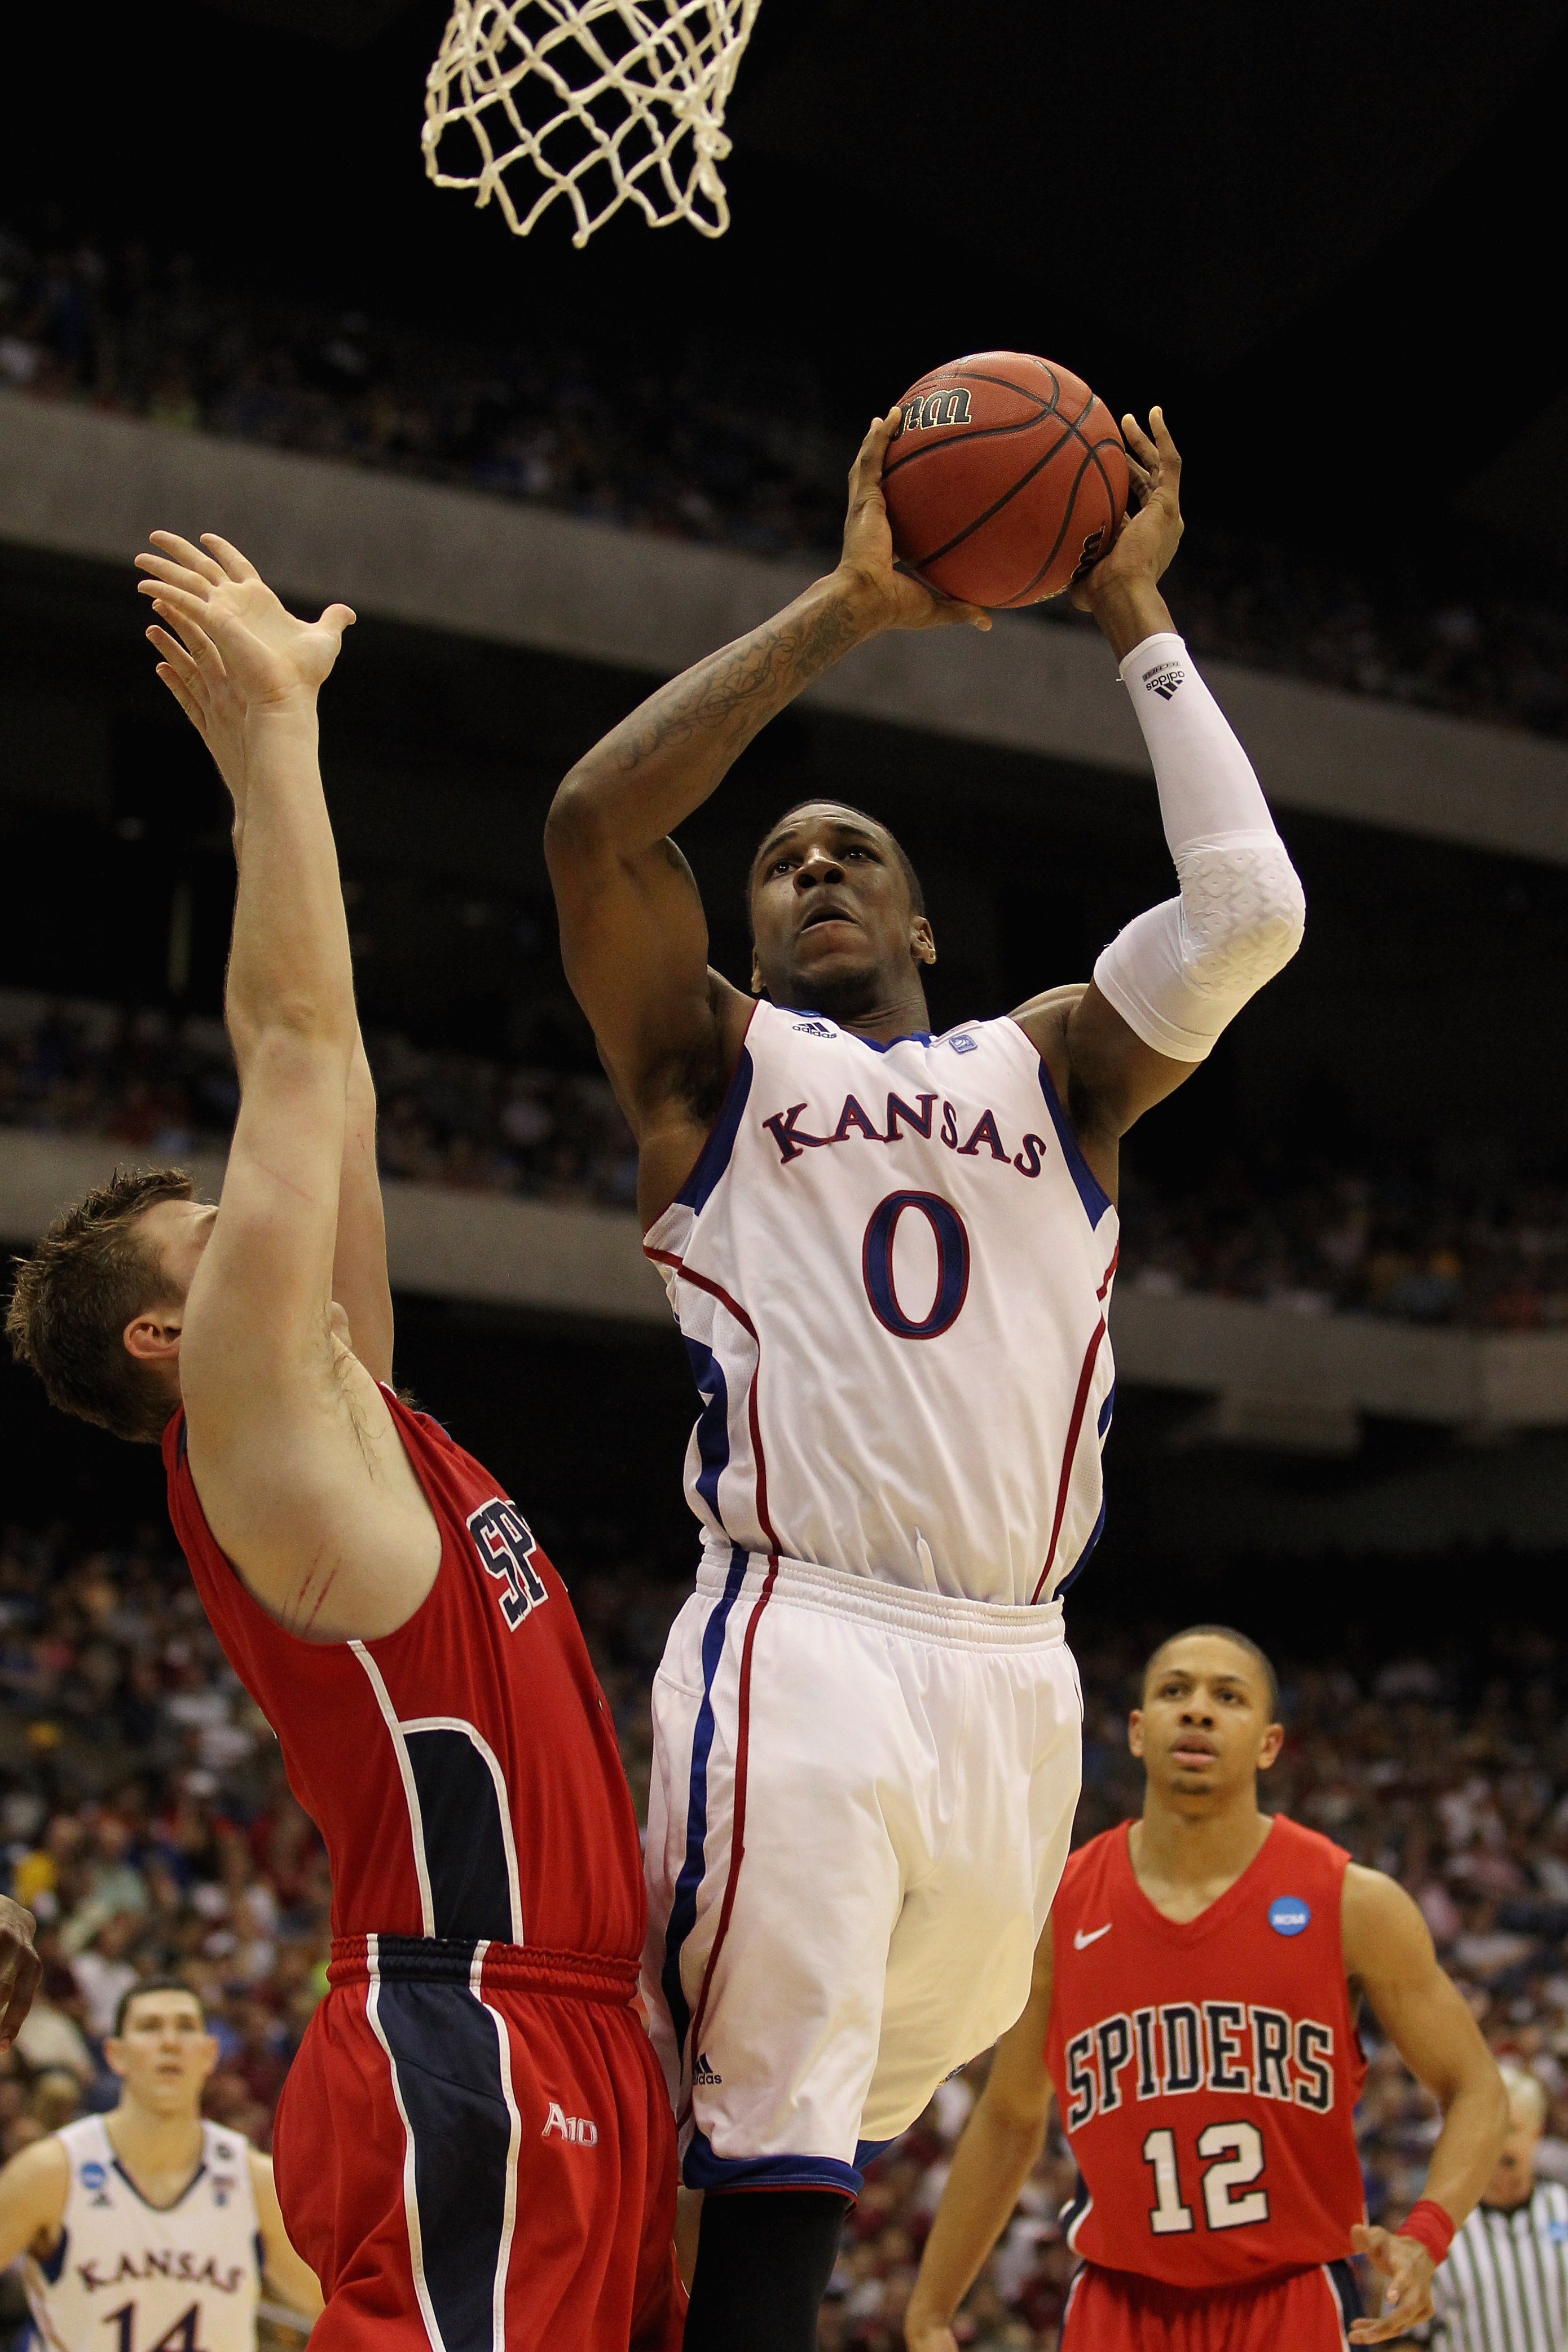 SAN ANTONIO, TX - MARCH 25:  Thomas Robinson #0 of the Kansas Jayhawks goes to the basket against the Richmond Spiders during the southwest regional of the 2011 NCAA men's basketball tournament at the Alamodome on March 25, 2011 in San Antonio, Texas.  (P